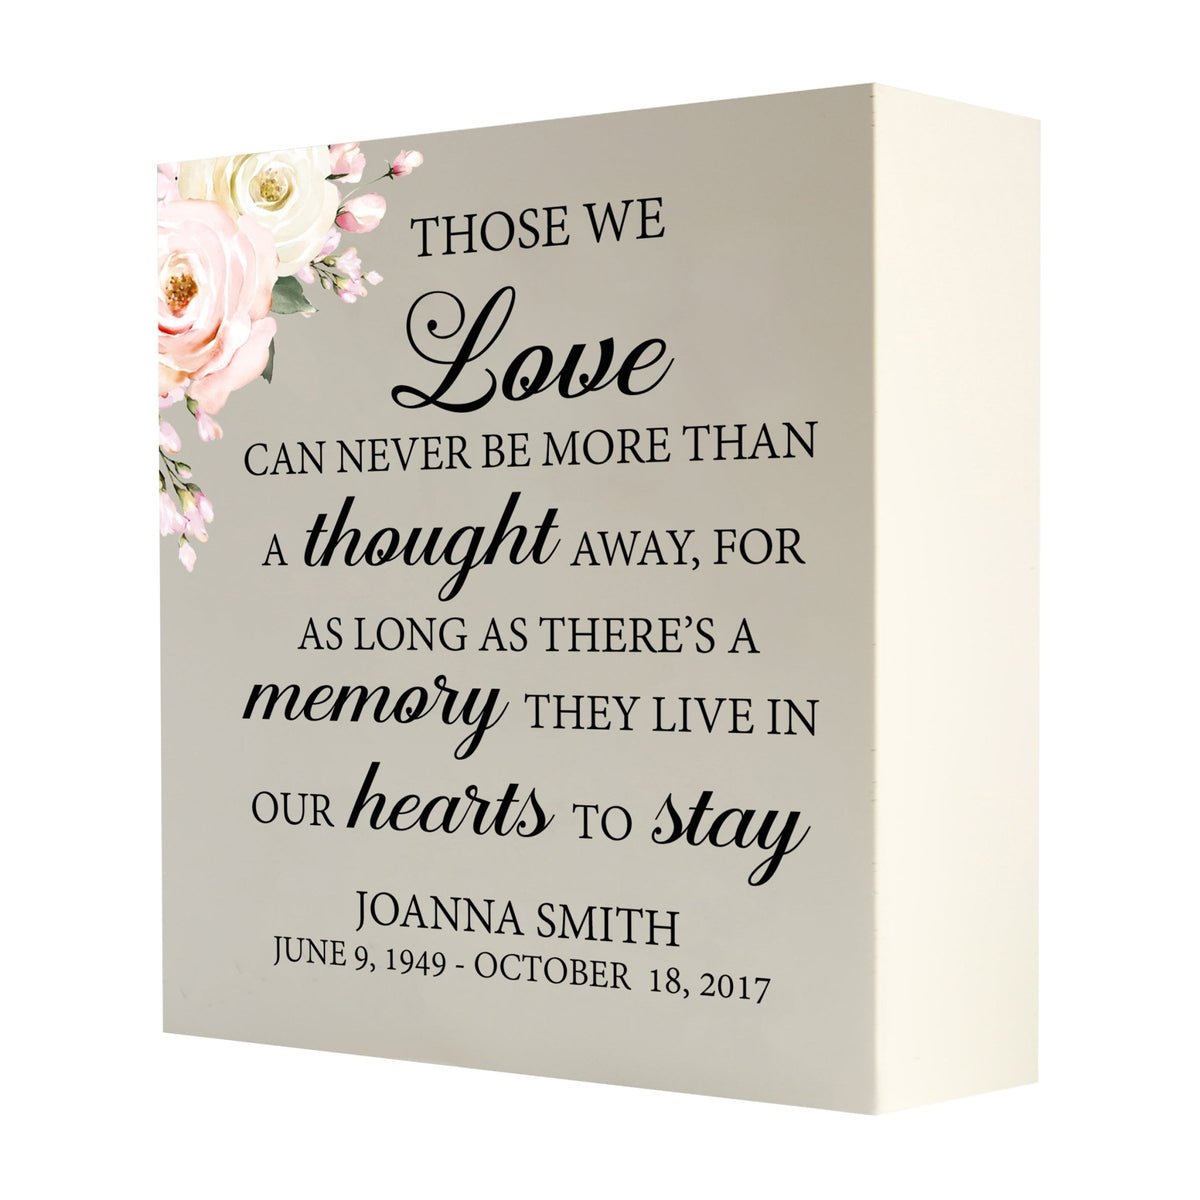 Personalized Modern Inspirational Memorial Wooden Shadow Box and Urn 10x10 holds 189 cu in of Human Ashes - Those We Love (Ivory) - LifeSong Milestones